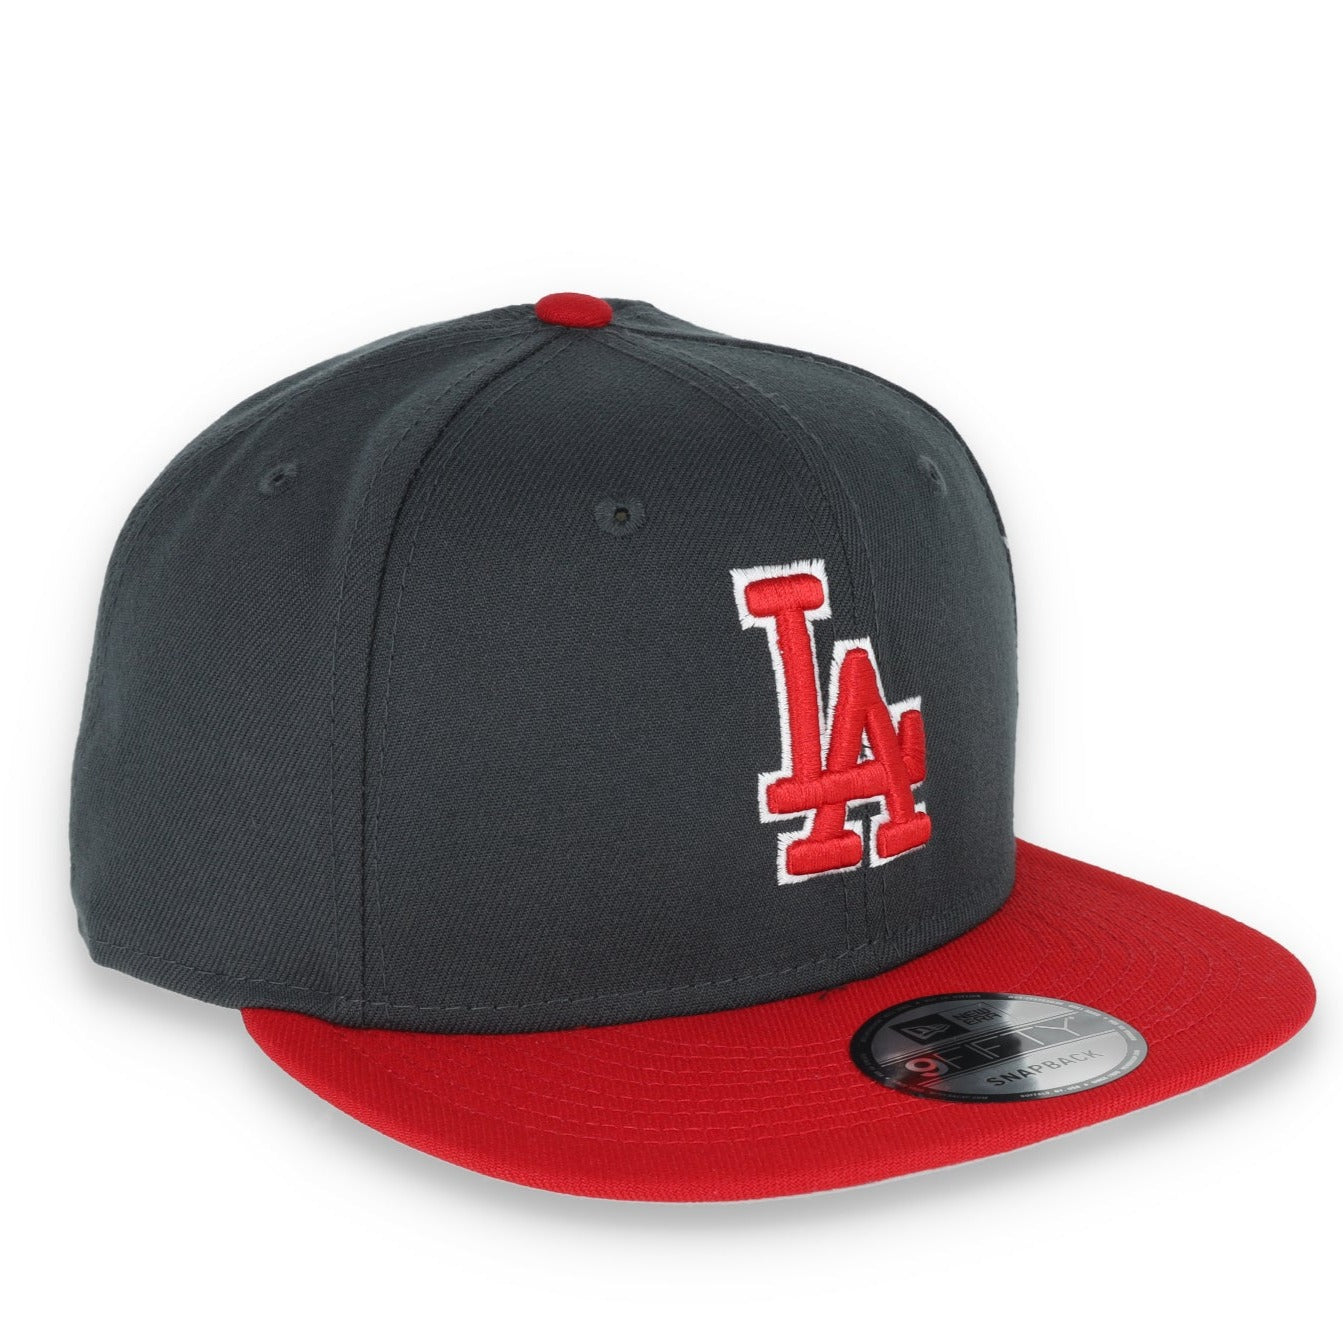 New Era Los Angeles Dodgers 2-Tone Color Pack 9FIFTY Snapback Hat- Grey/Scarlet